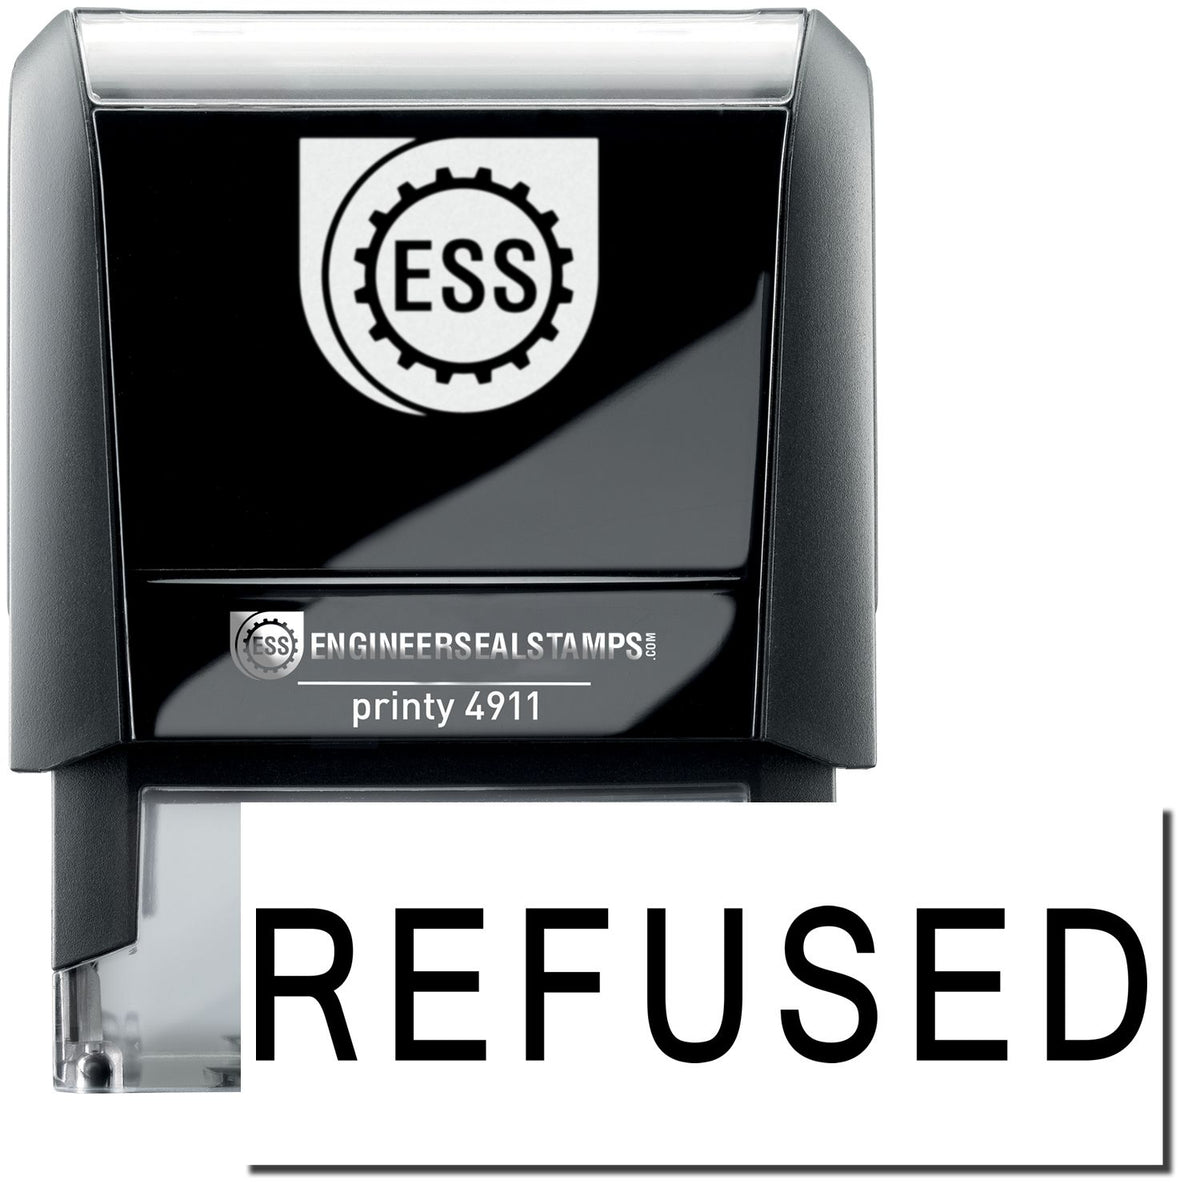 A self-inking stamp with a stamped image showing how the text &quot;REFUSED&quot; is displayed after stamping.